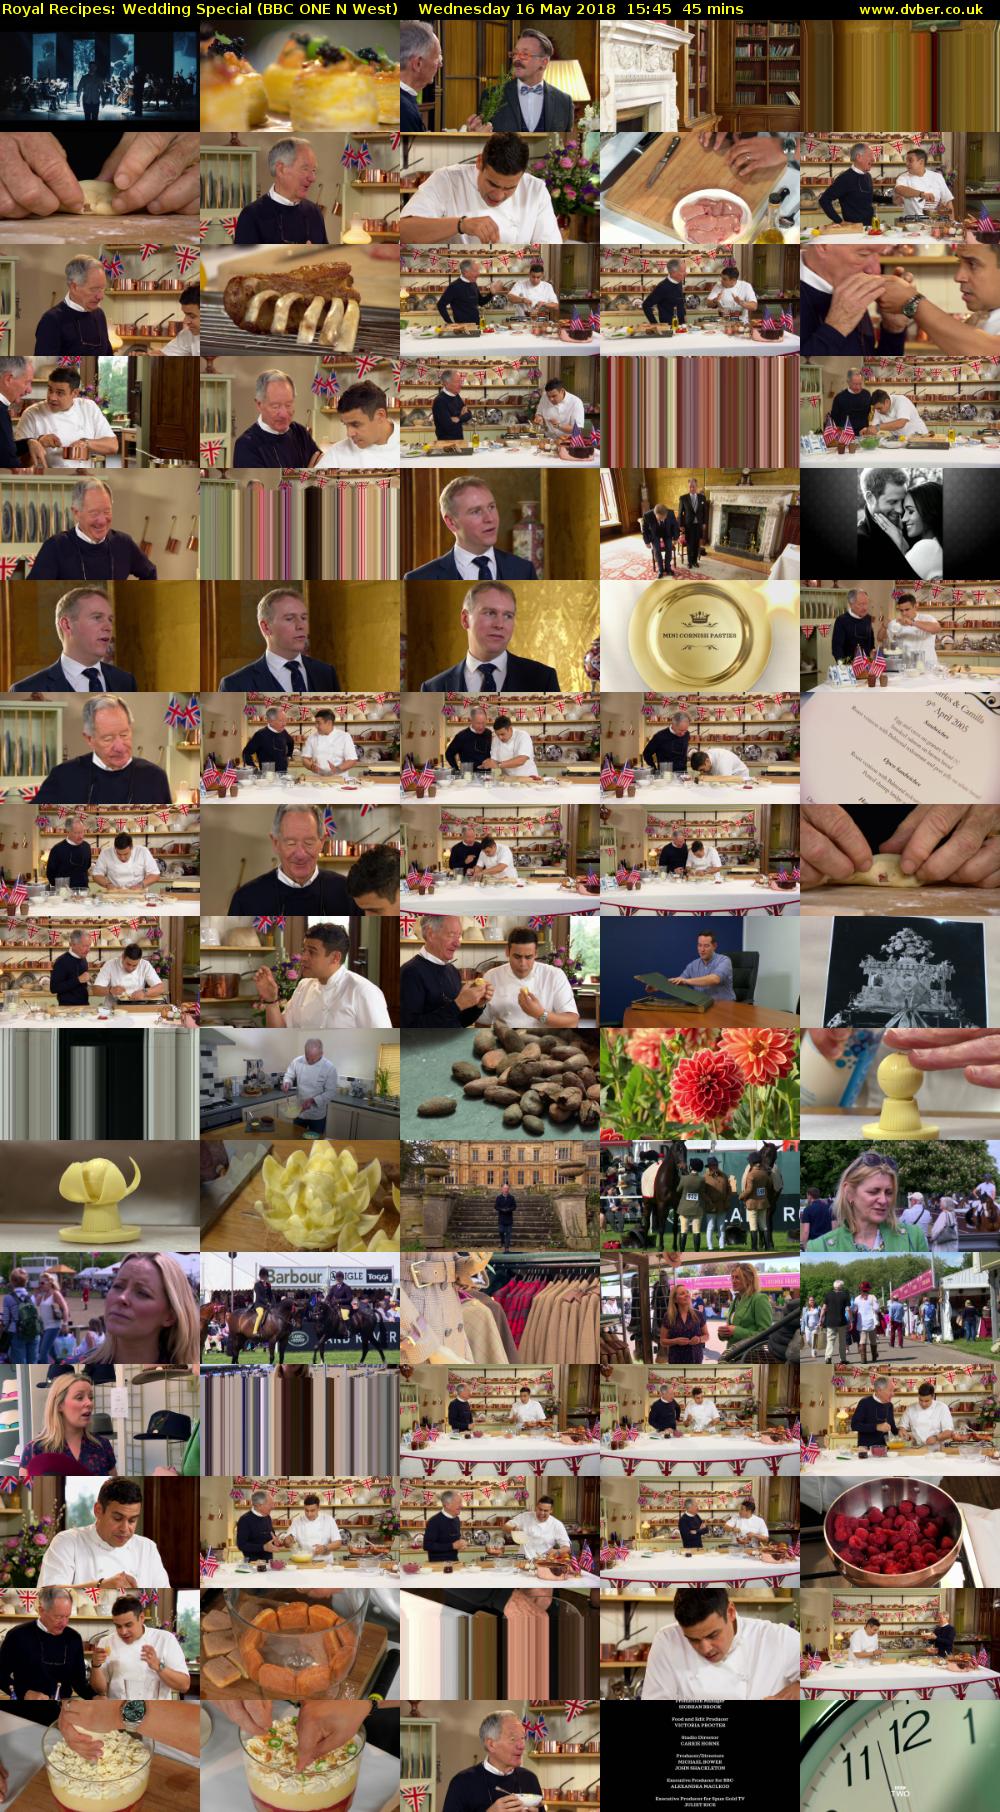 Royal Recipes: Wedding Special (BBC ONE N West) Wednesday 16 May 2018 15:45 - 16:30